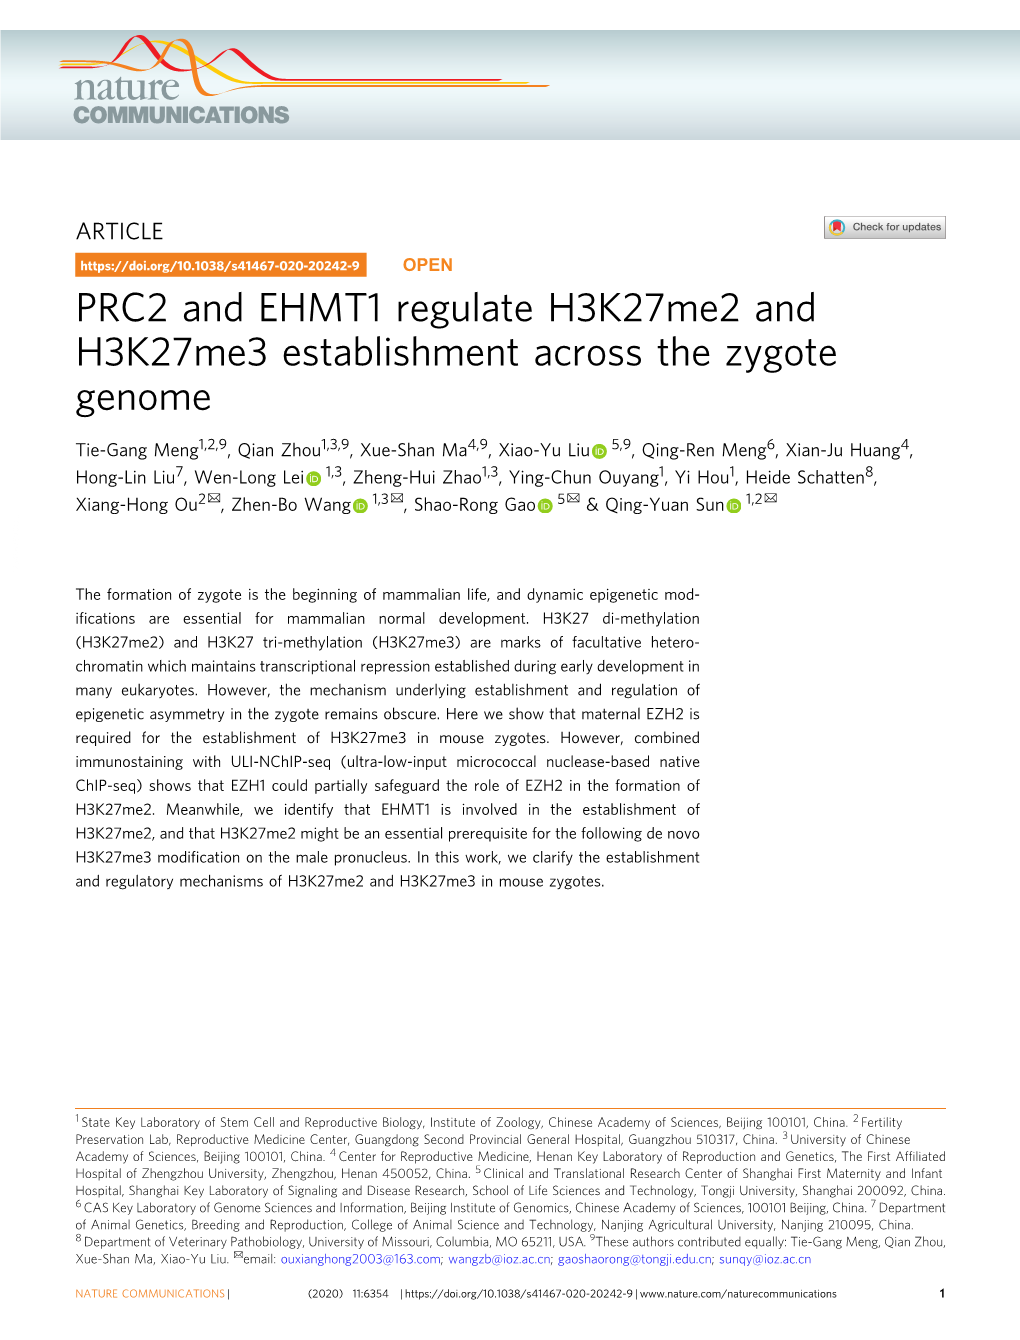 PRC2 and EHMT1 Regulate H3k27me2 and H3k27me3 Establishment Across the Zygote Genome